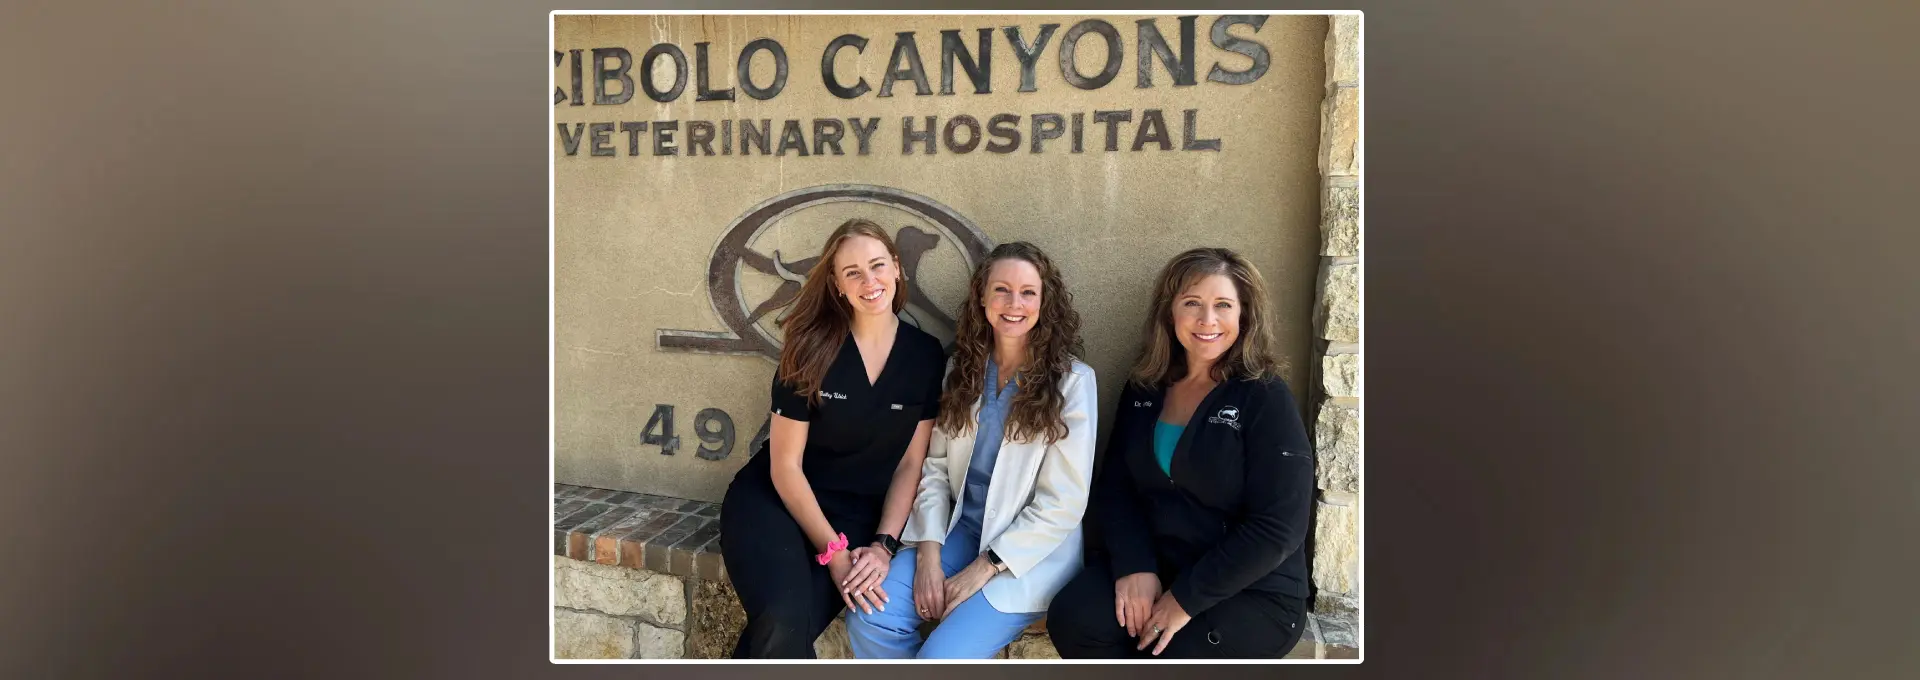 Three women standing in front of a sign for the bolo canyons veterinary hospital.